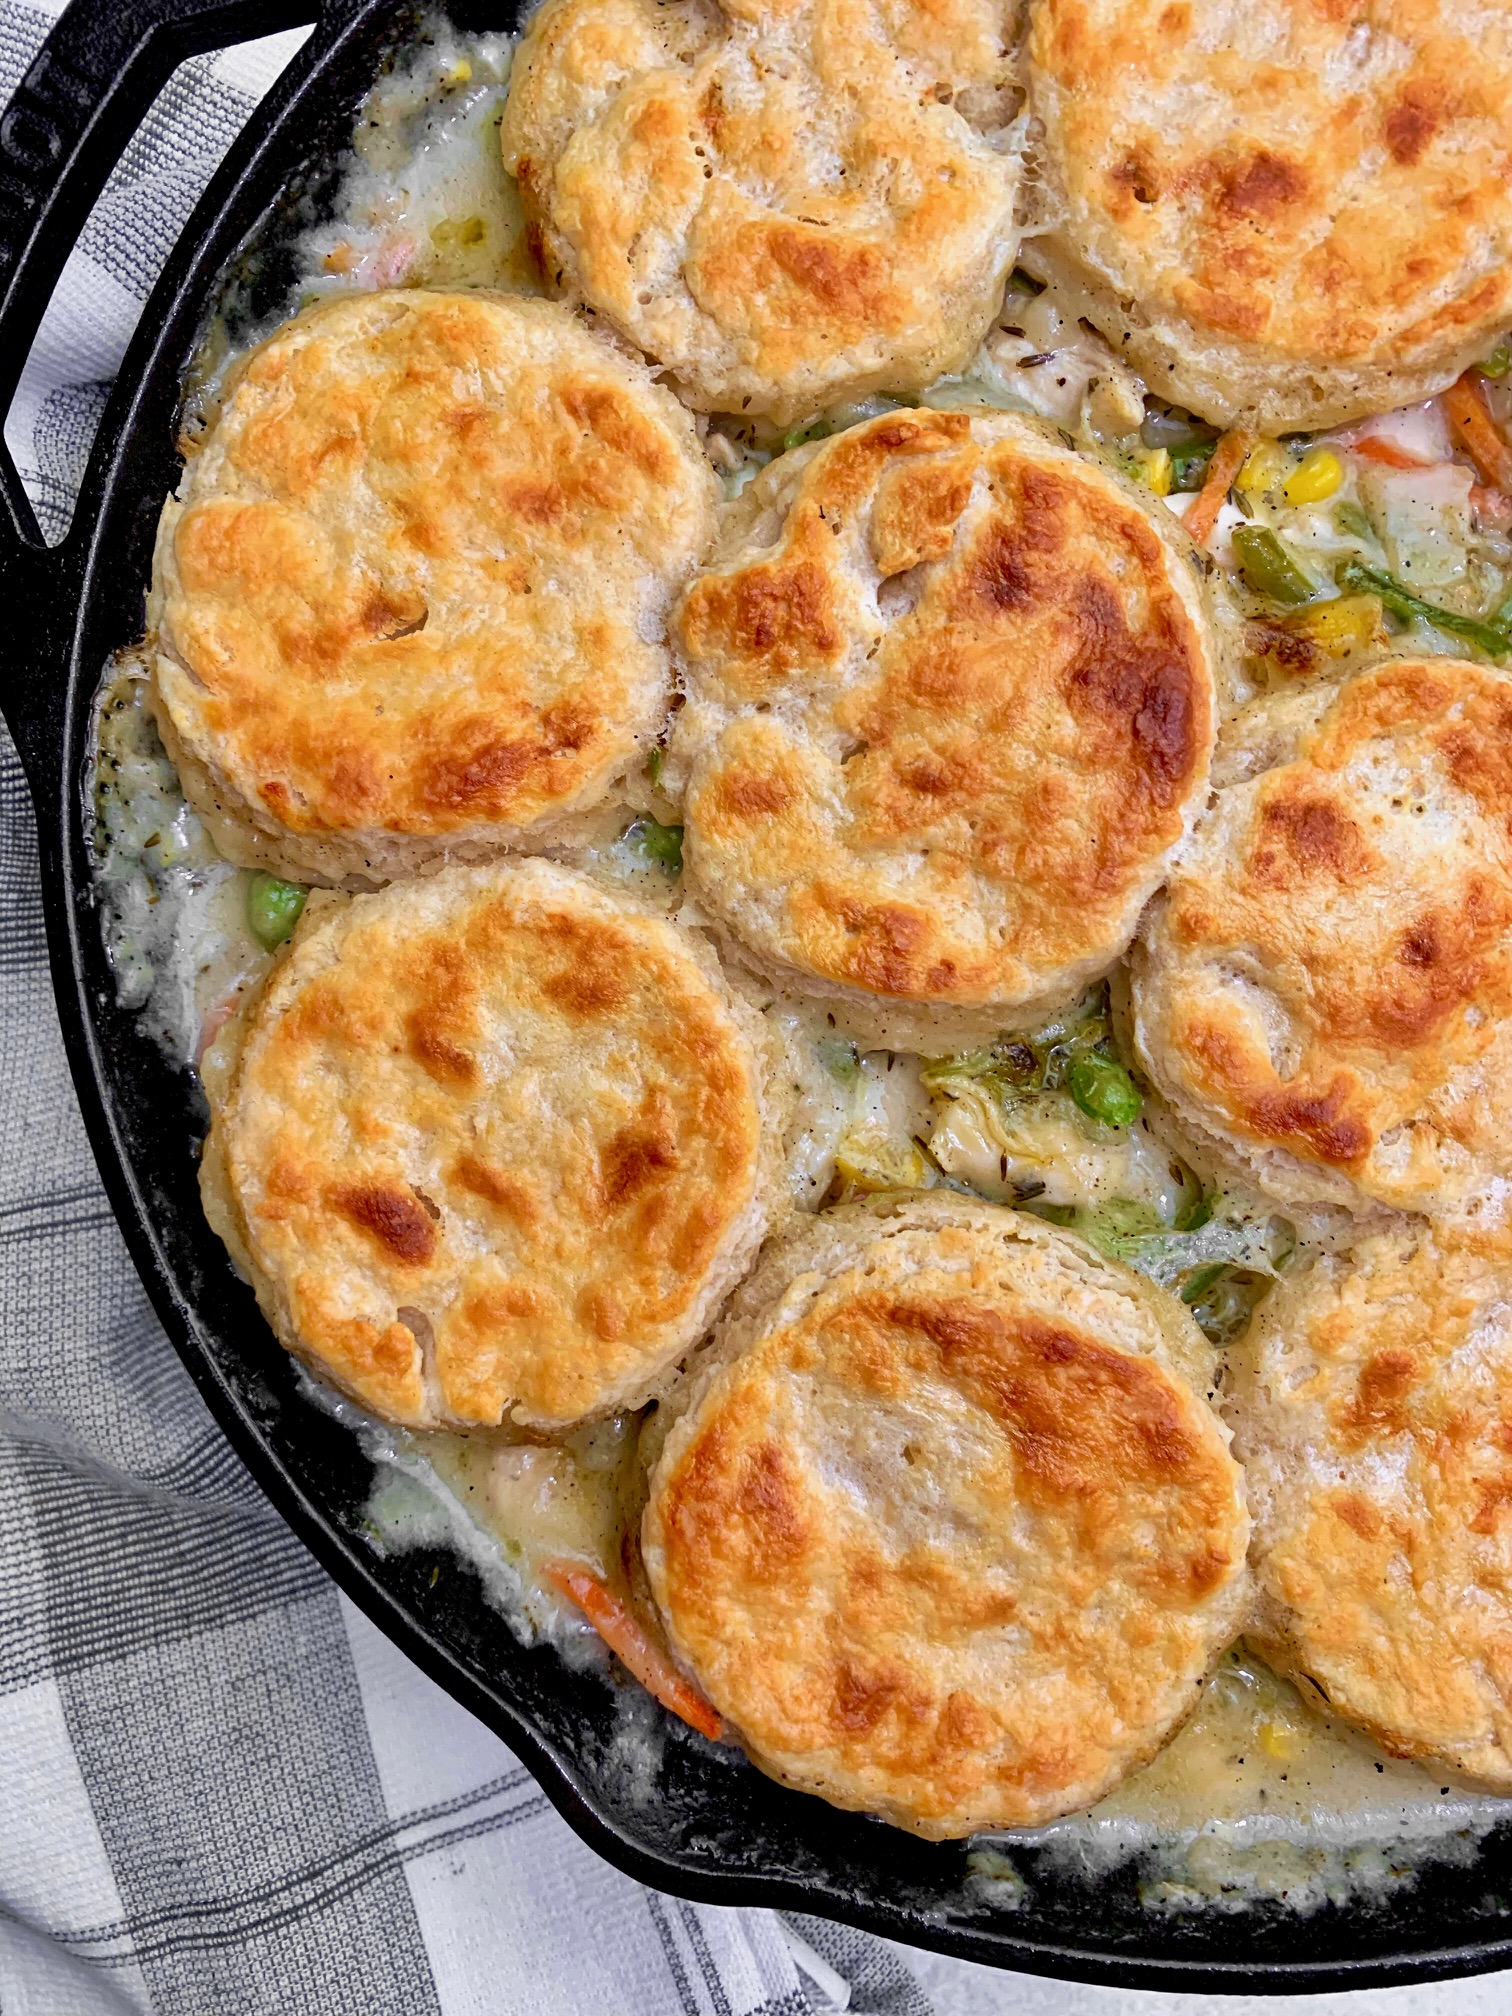 A close up of the finished chicken pot pie with buttermilk biscuits on top.